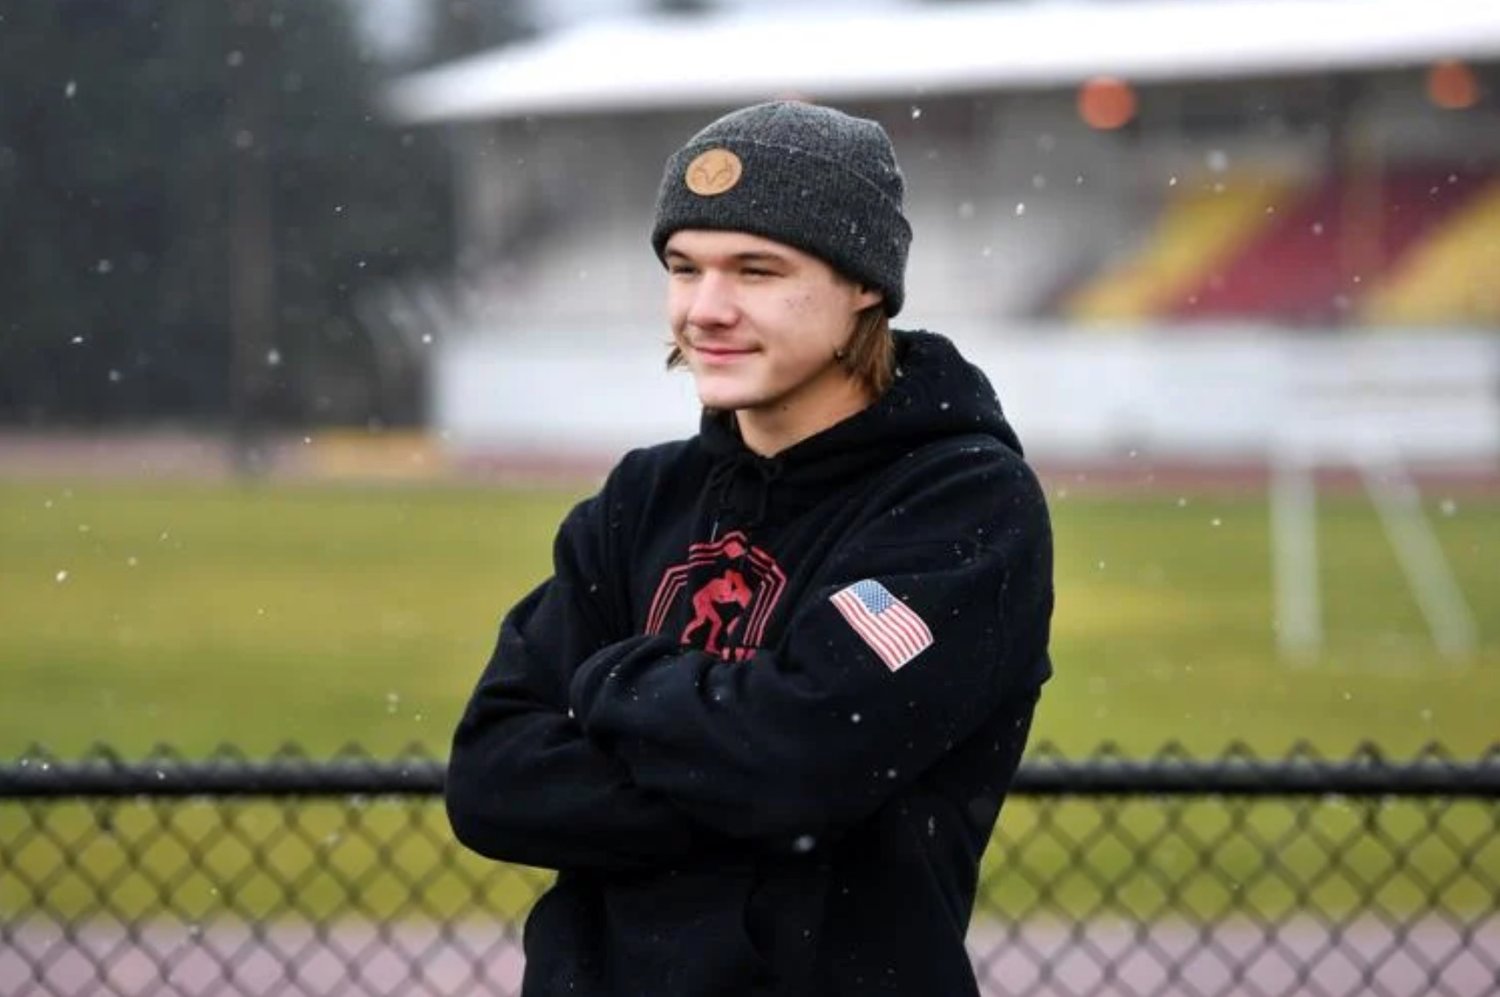 Winlock senior football player and wrestler Jay Crow poses in front of Winlock High School's football field on Tuesday, Dec. 1.